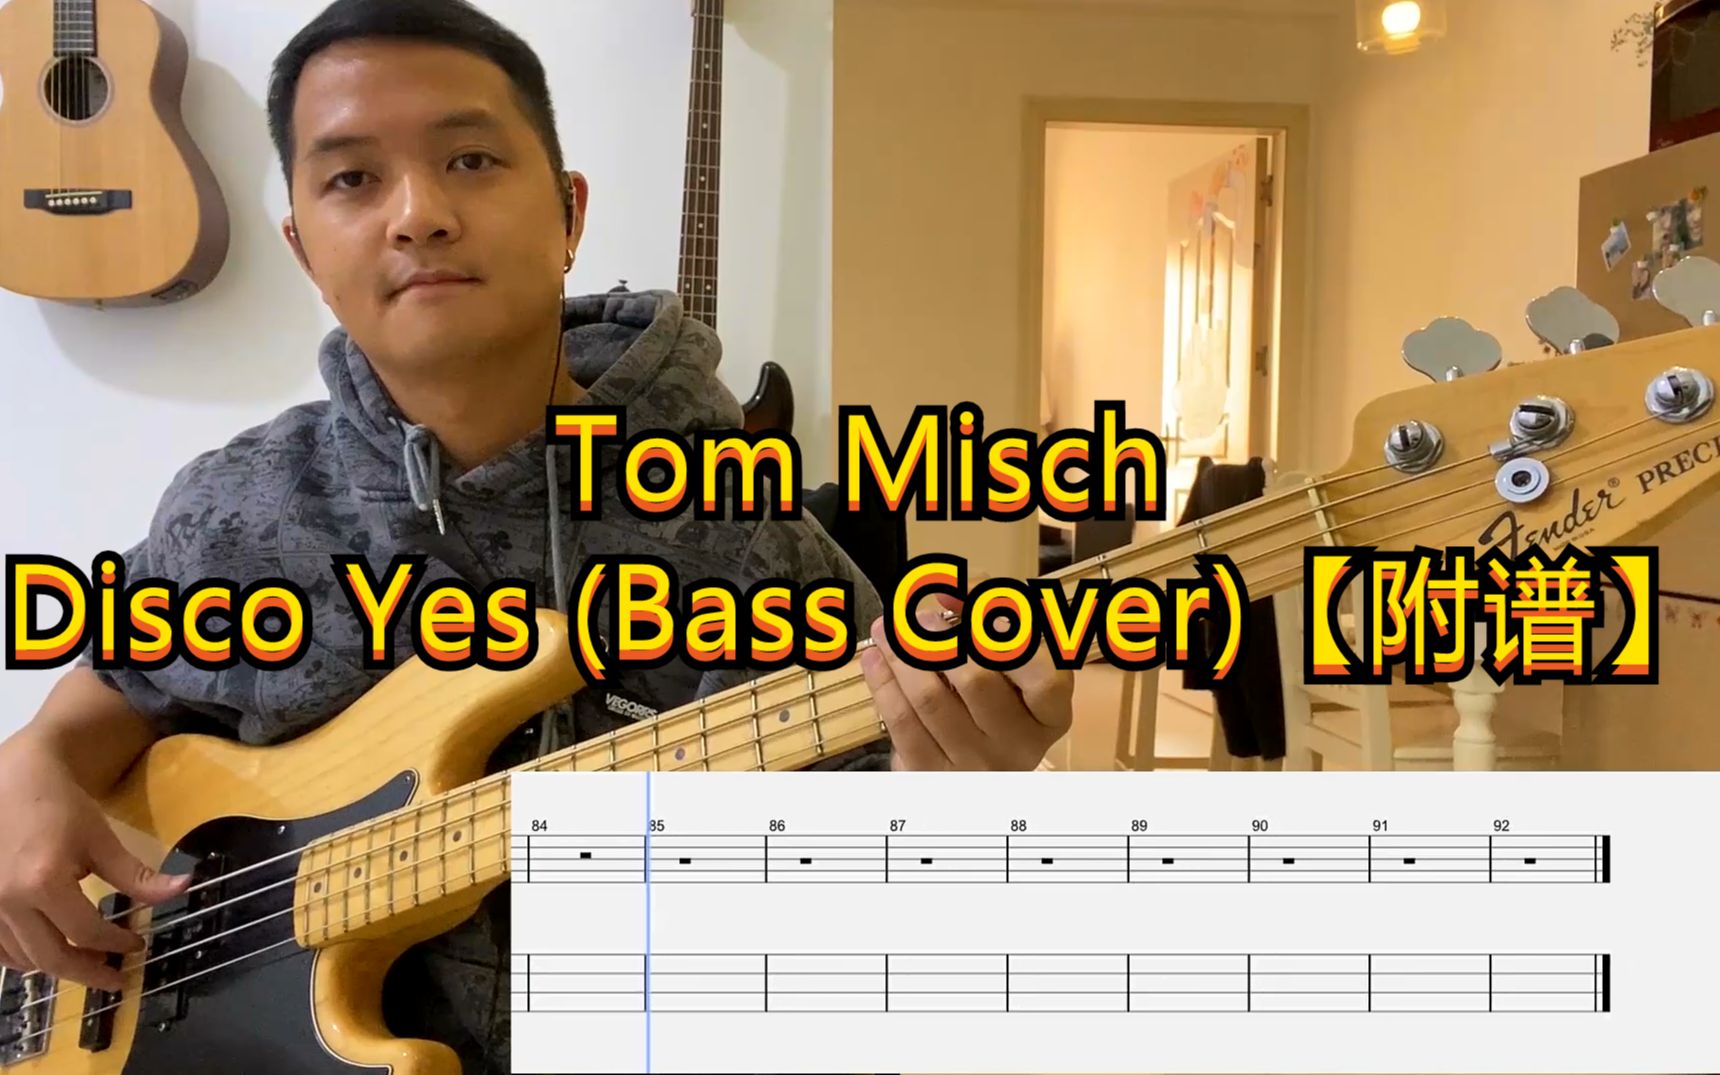 Tom Misch - Disco Yes (Bass Cover)【附谱】